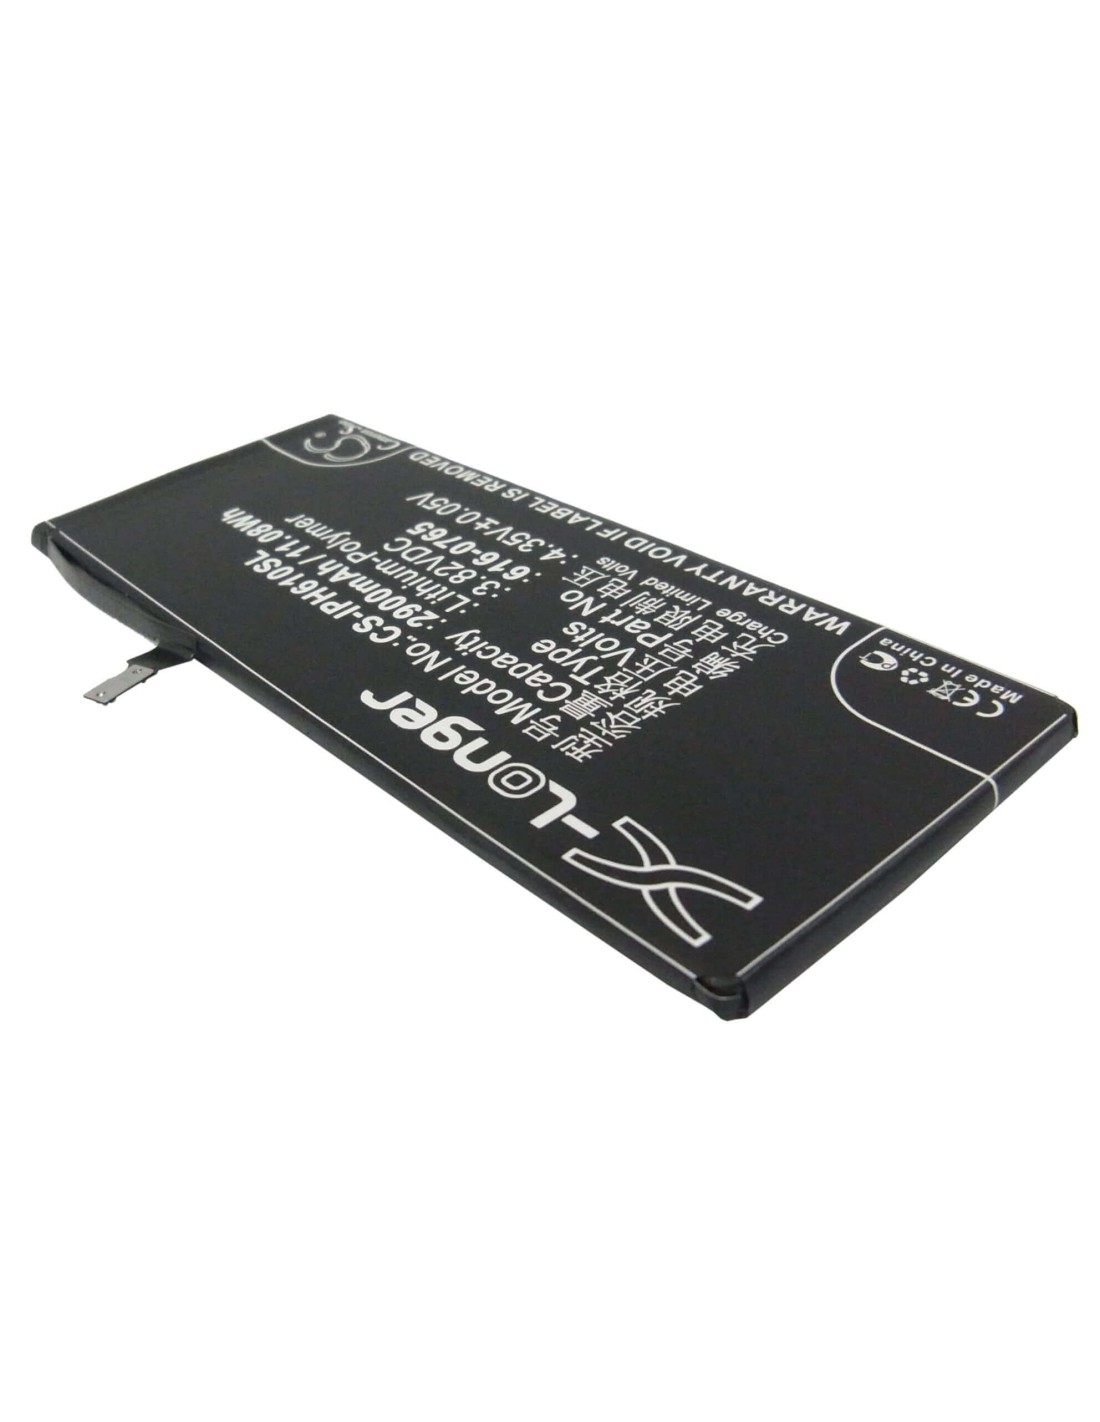 Battery for Apple iPhone 6 Plus, iPhone 6 5.5, A1593 3.82V, 2900mAh - 11.08Wh